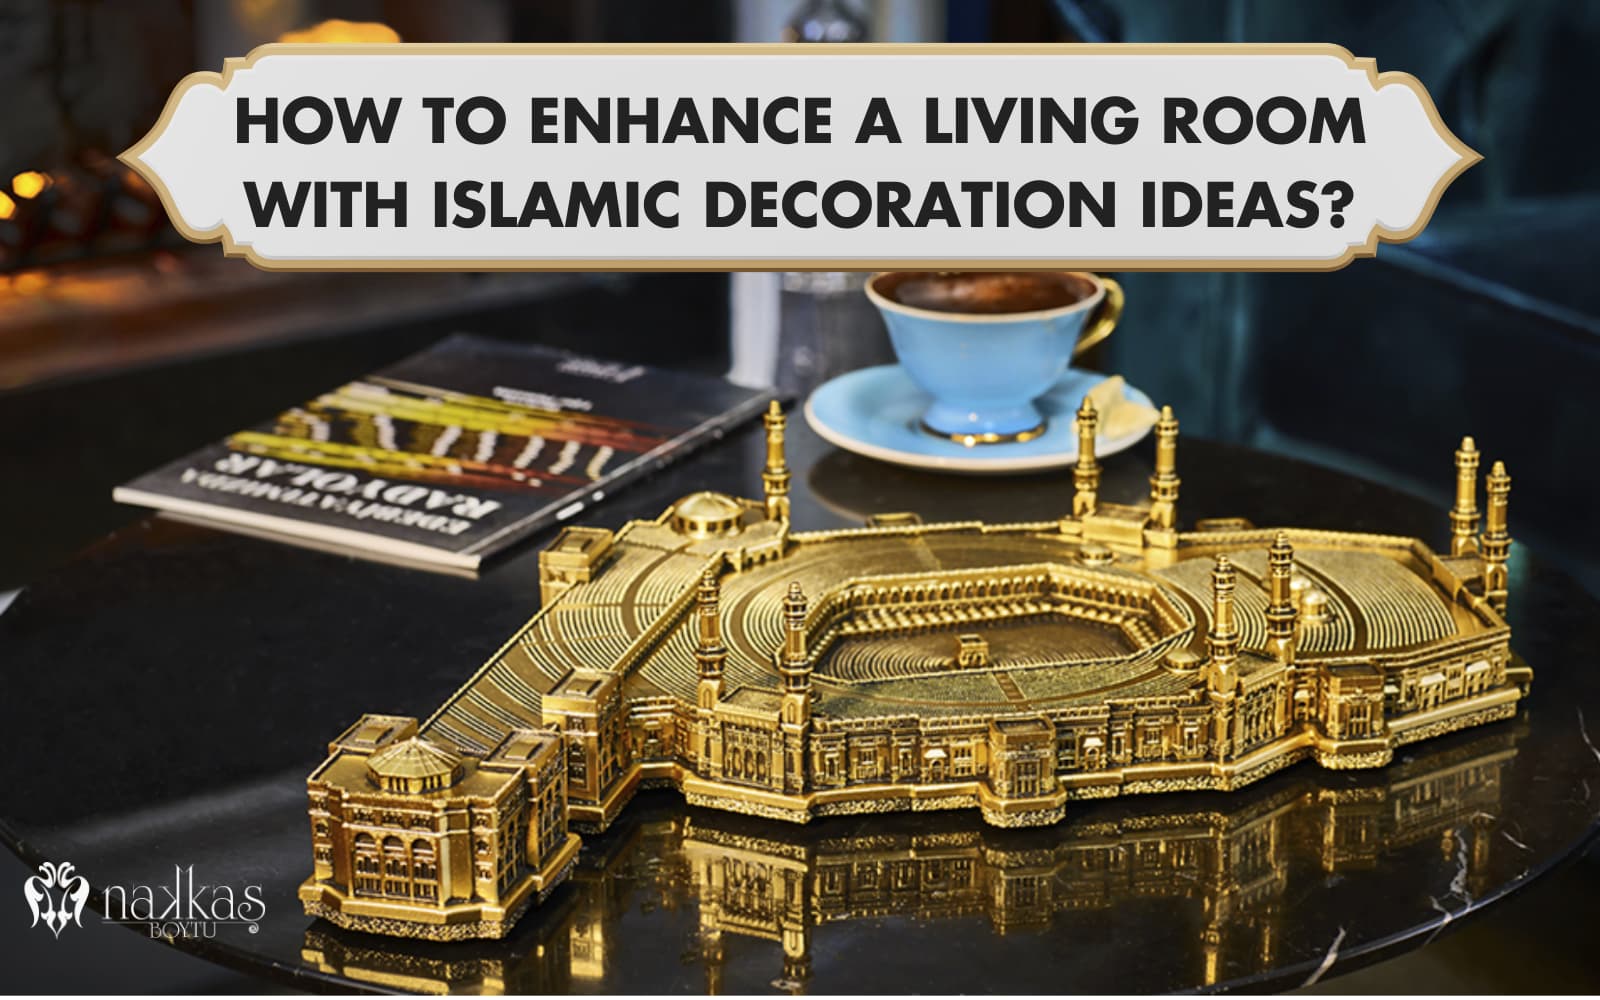 How to Enhance a Living Room with Islamic Decoration Ideas?